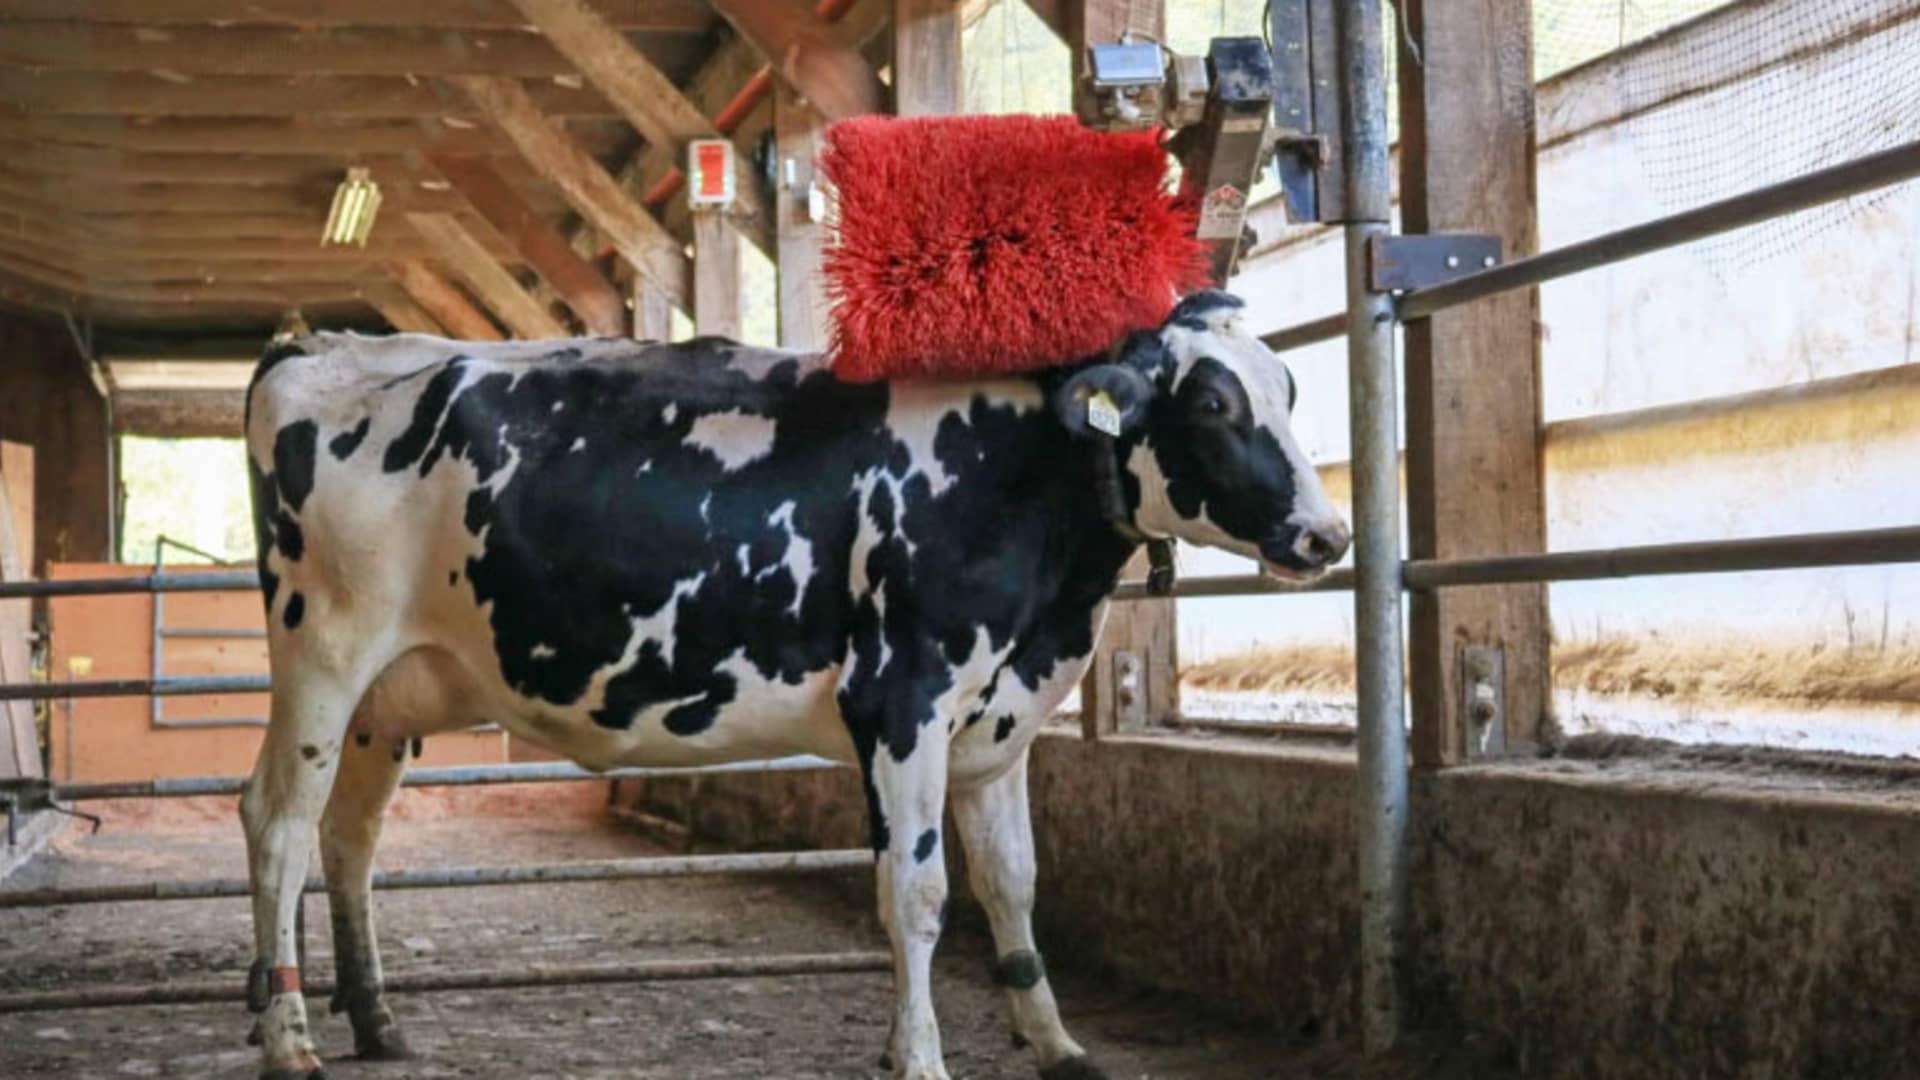 Give a cow a brush, and watch it scratch that itch